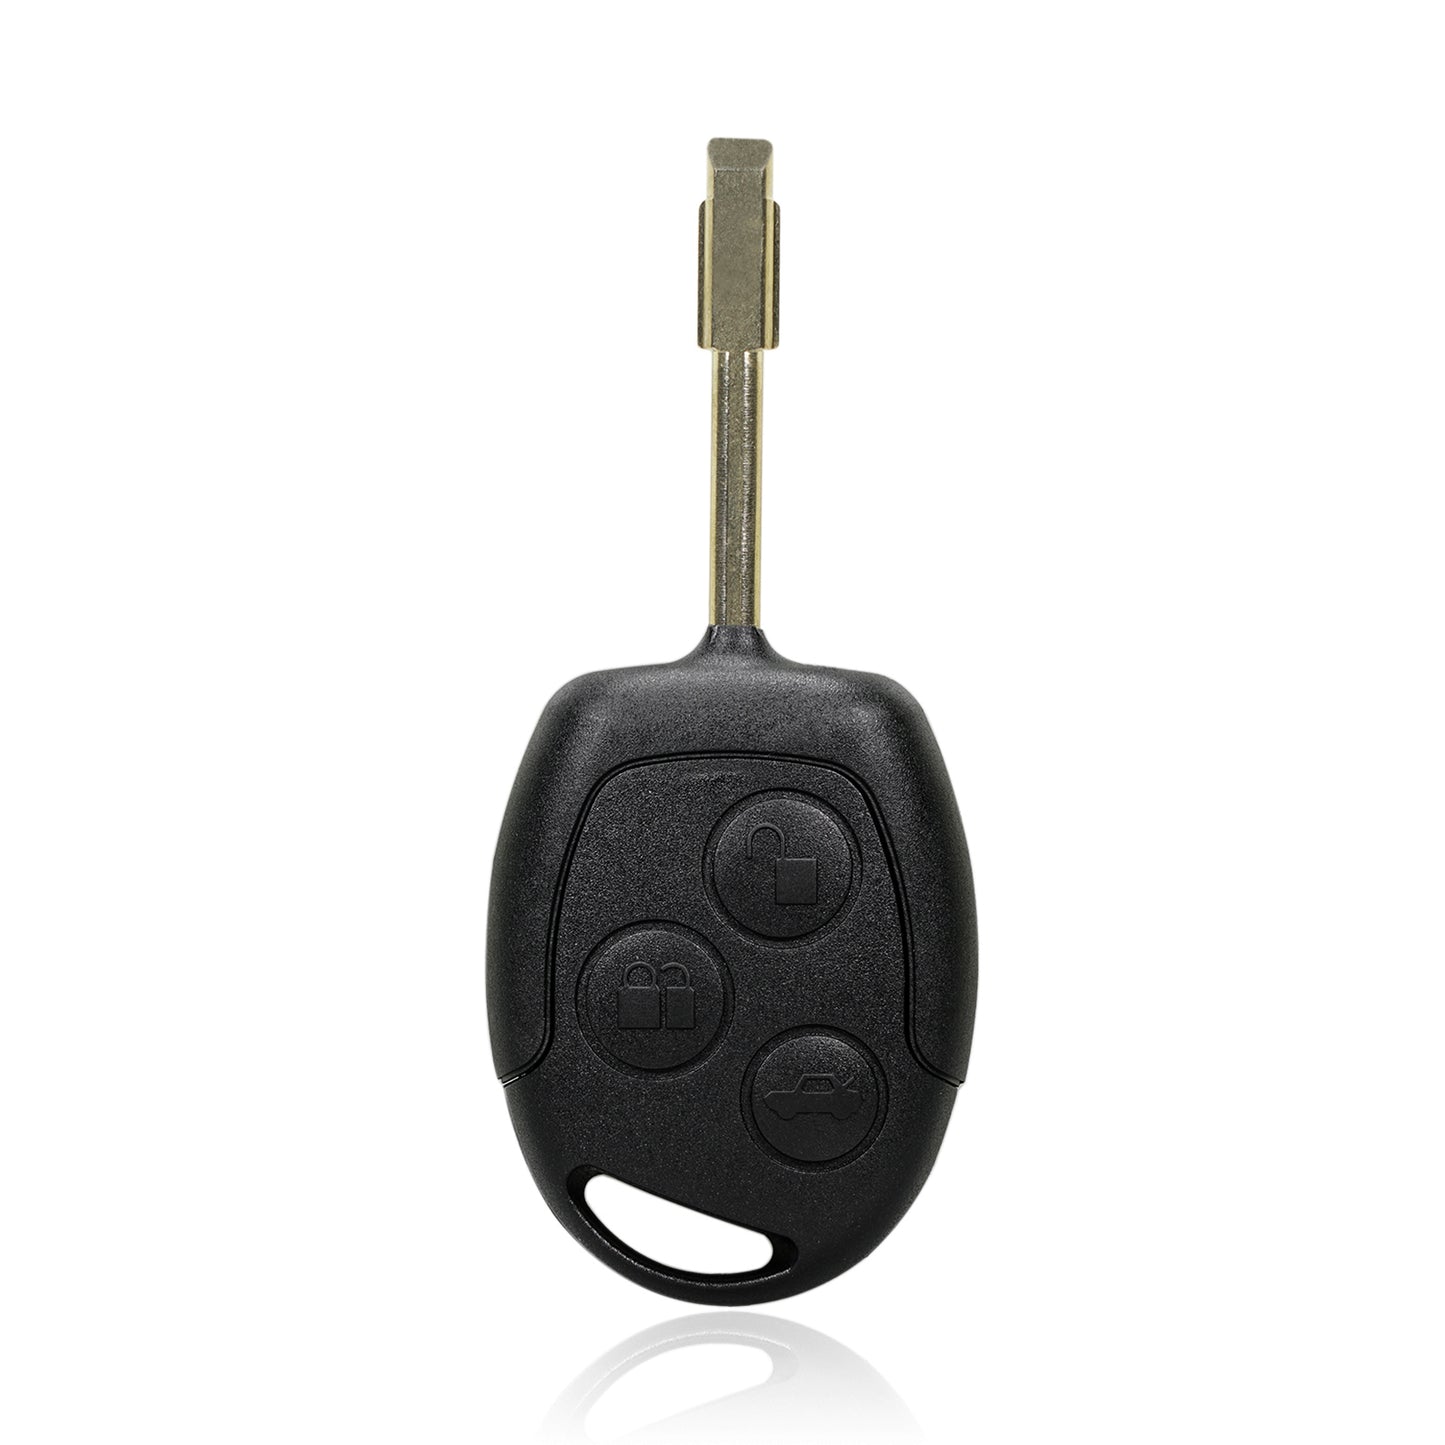 3 Buttons 315MHz Keyless Entry Fob Remote Car Key For 2010-2013 Ford Transit Connect FCC ID: KR55WK47899 SKU : J733